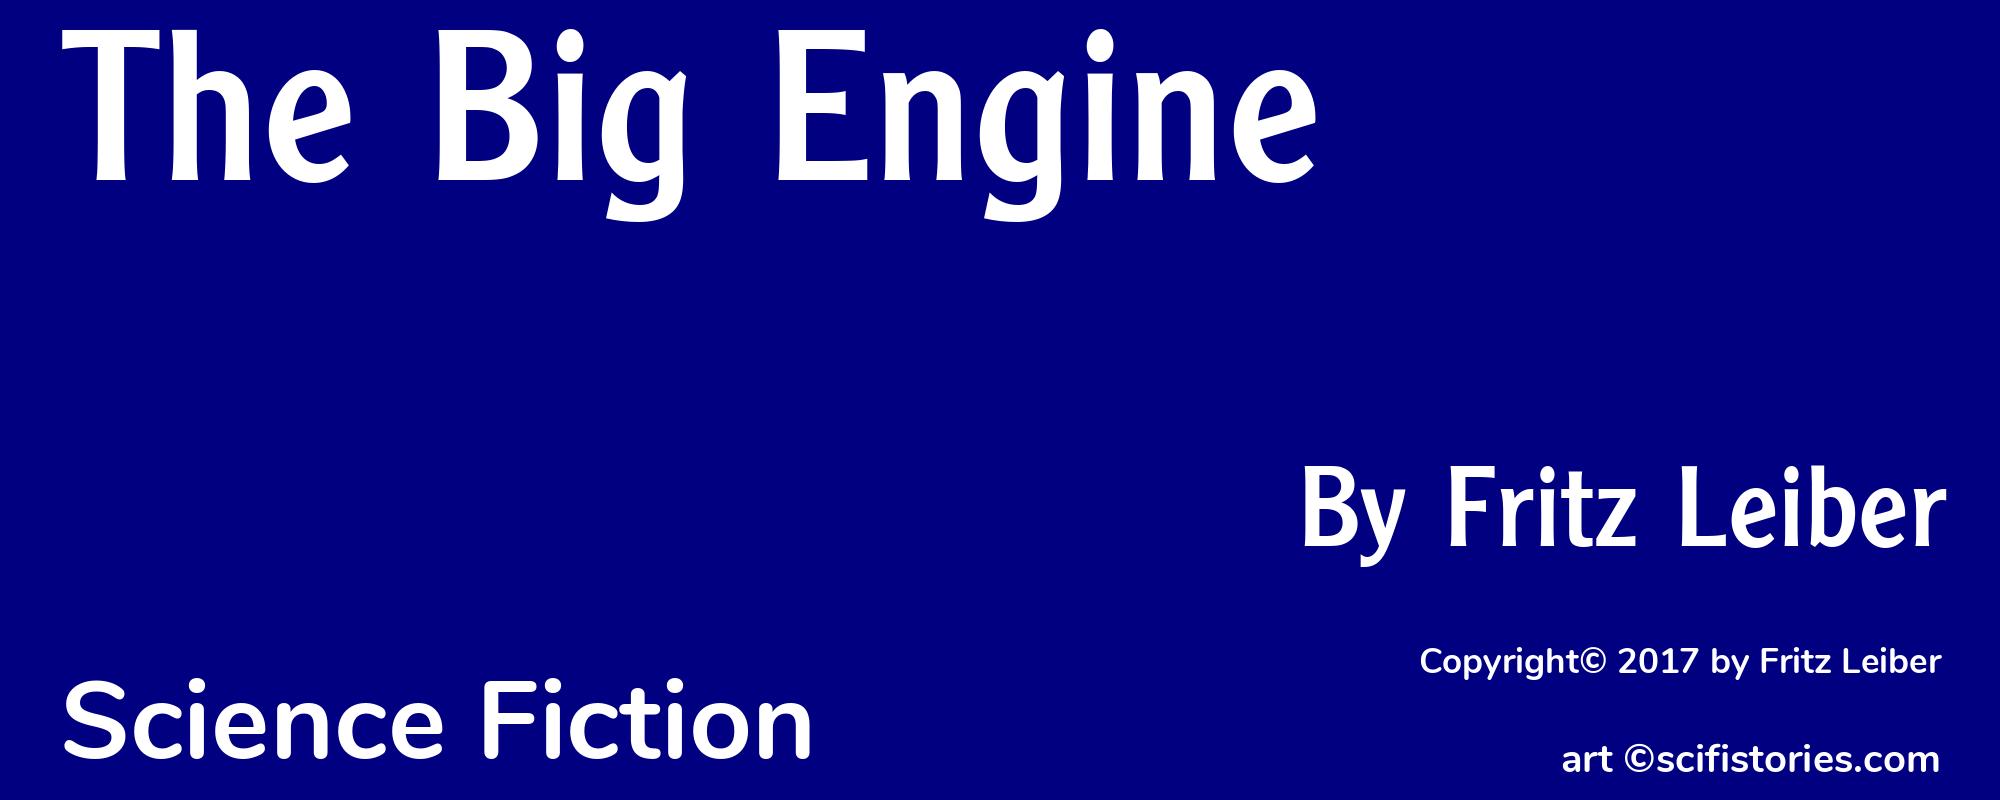 The Big Engine - Cover